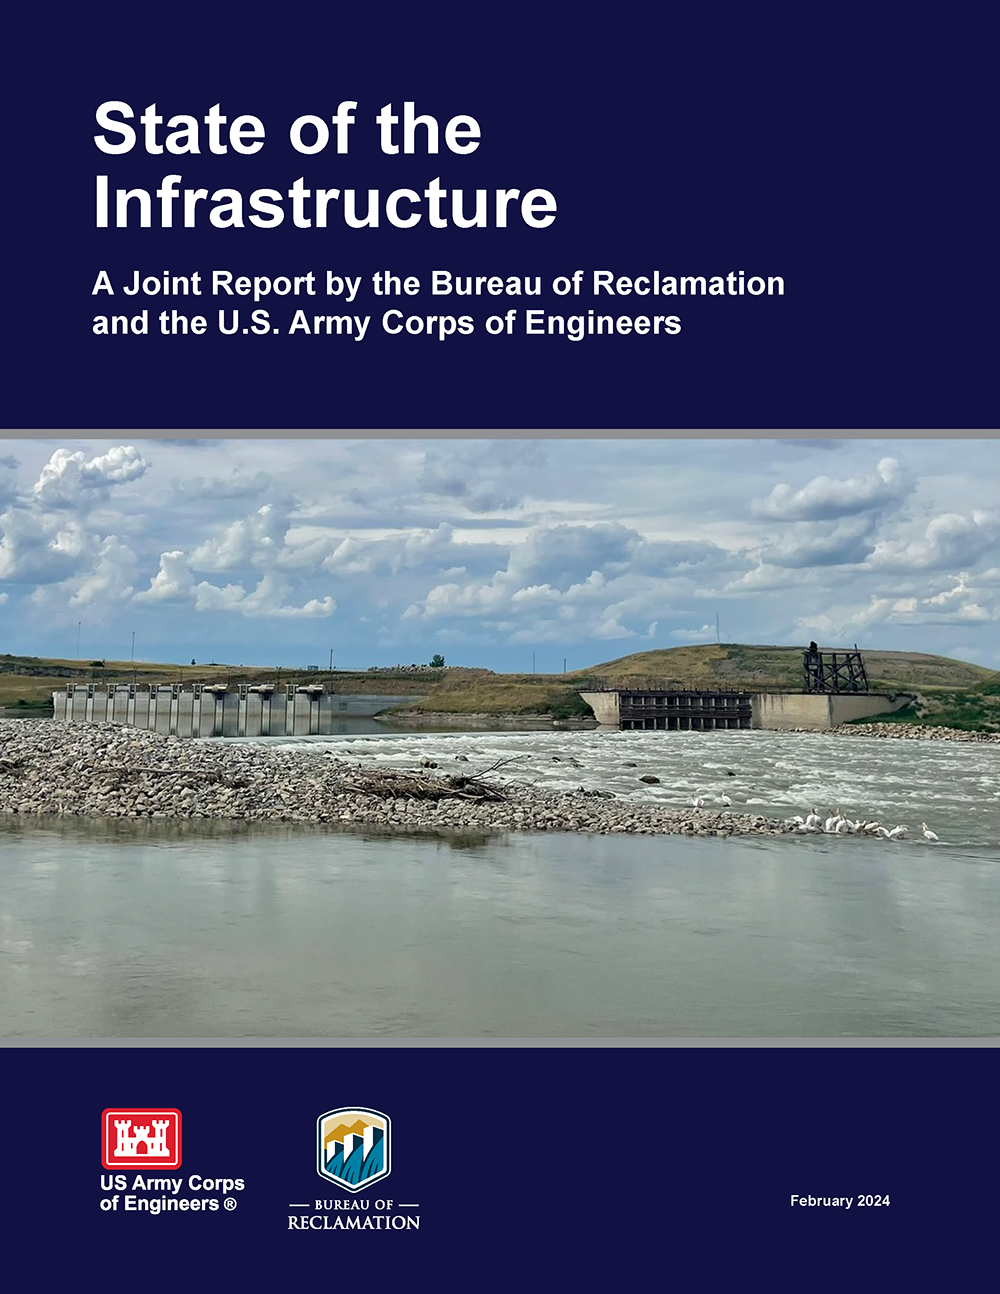 Joint Infrastructure Report by the U.S. Army Corps of Engineers and the Bureau of Reclamation.